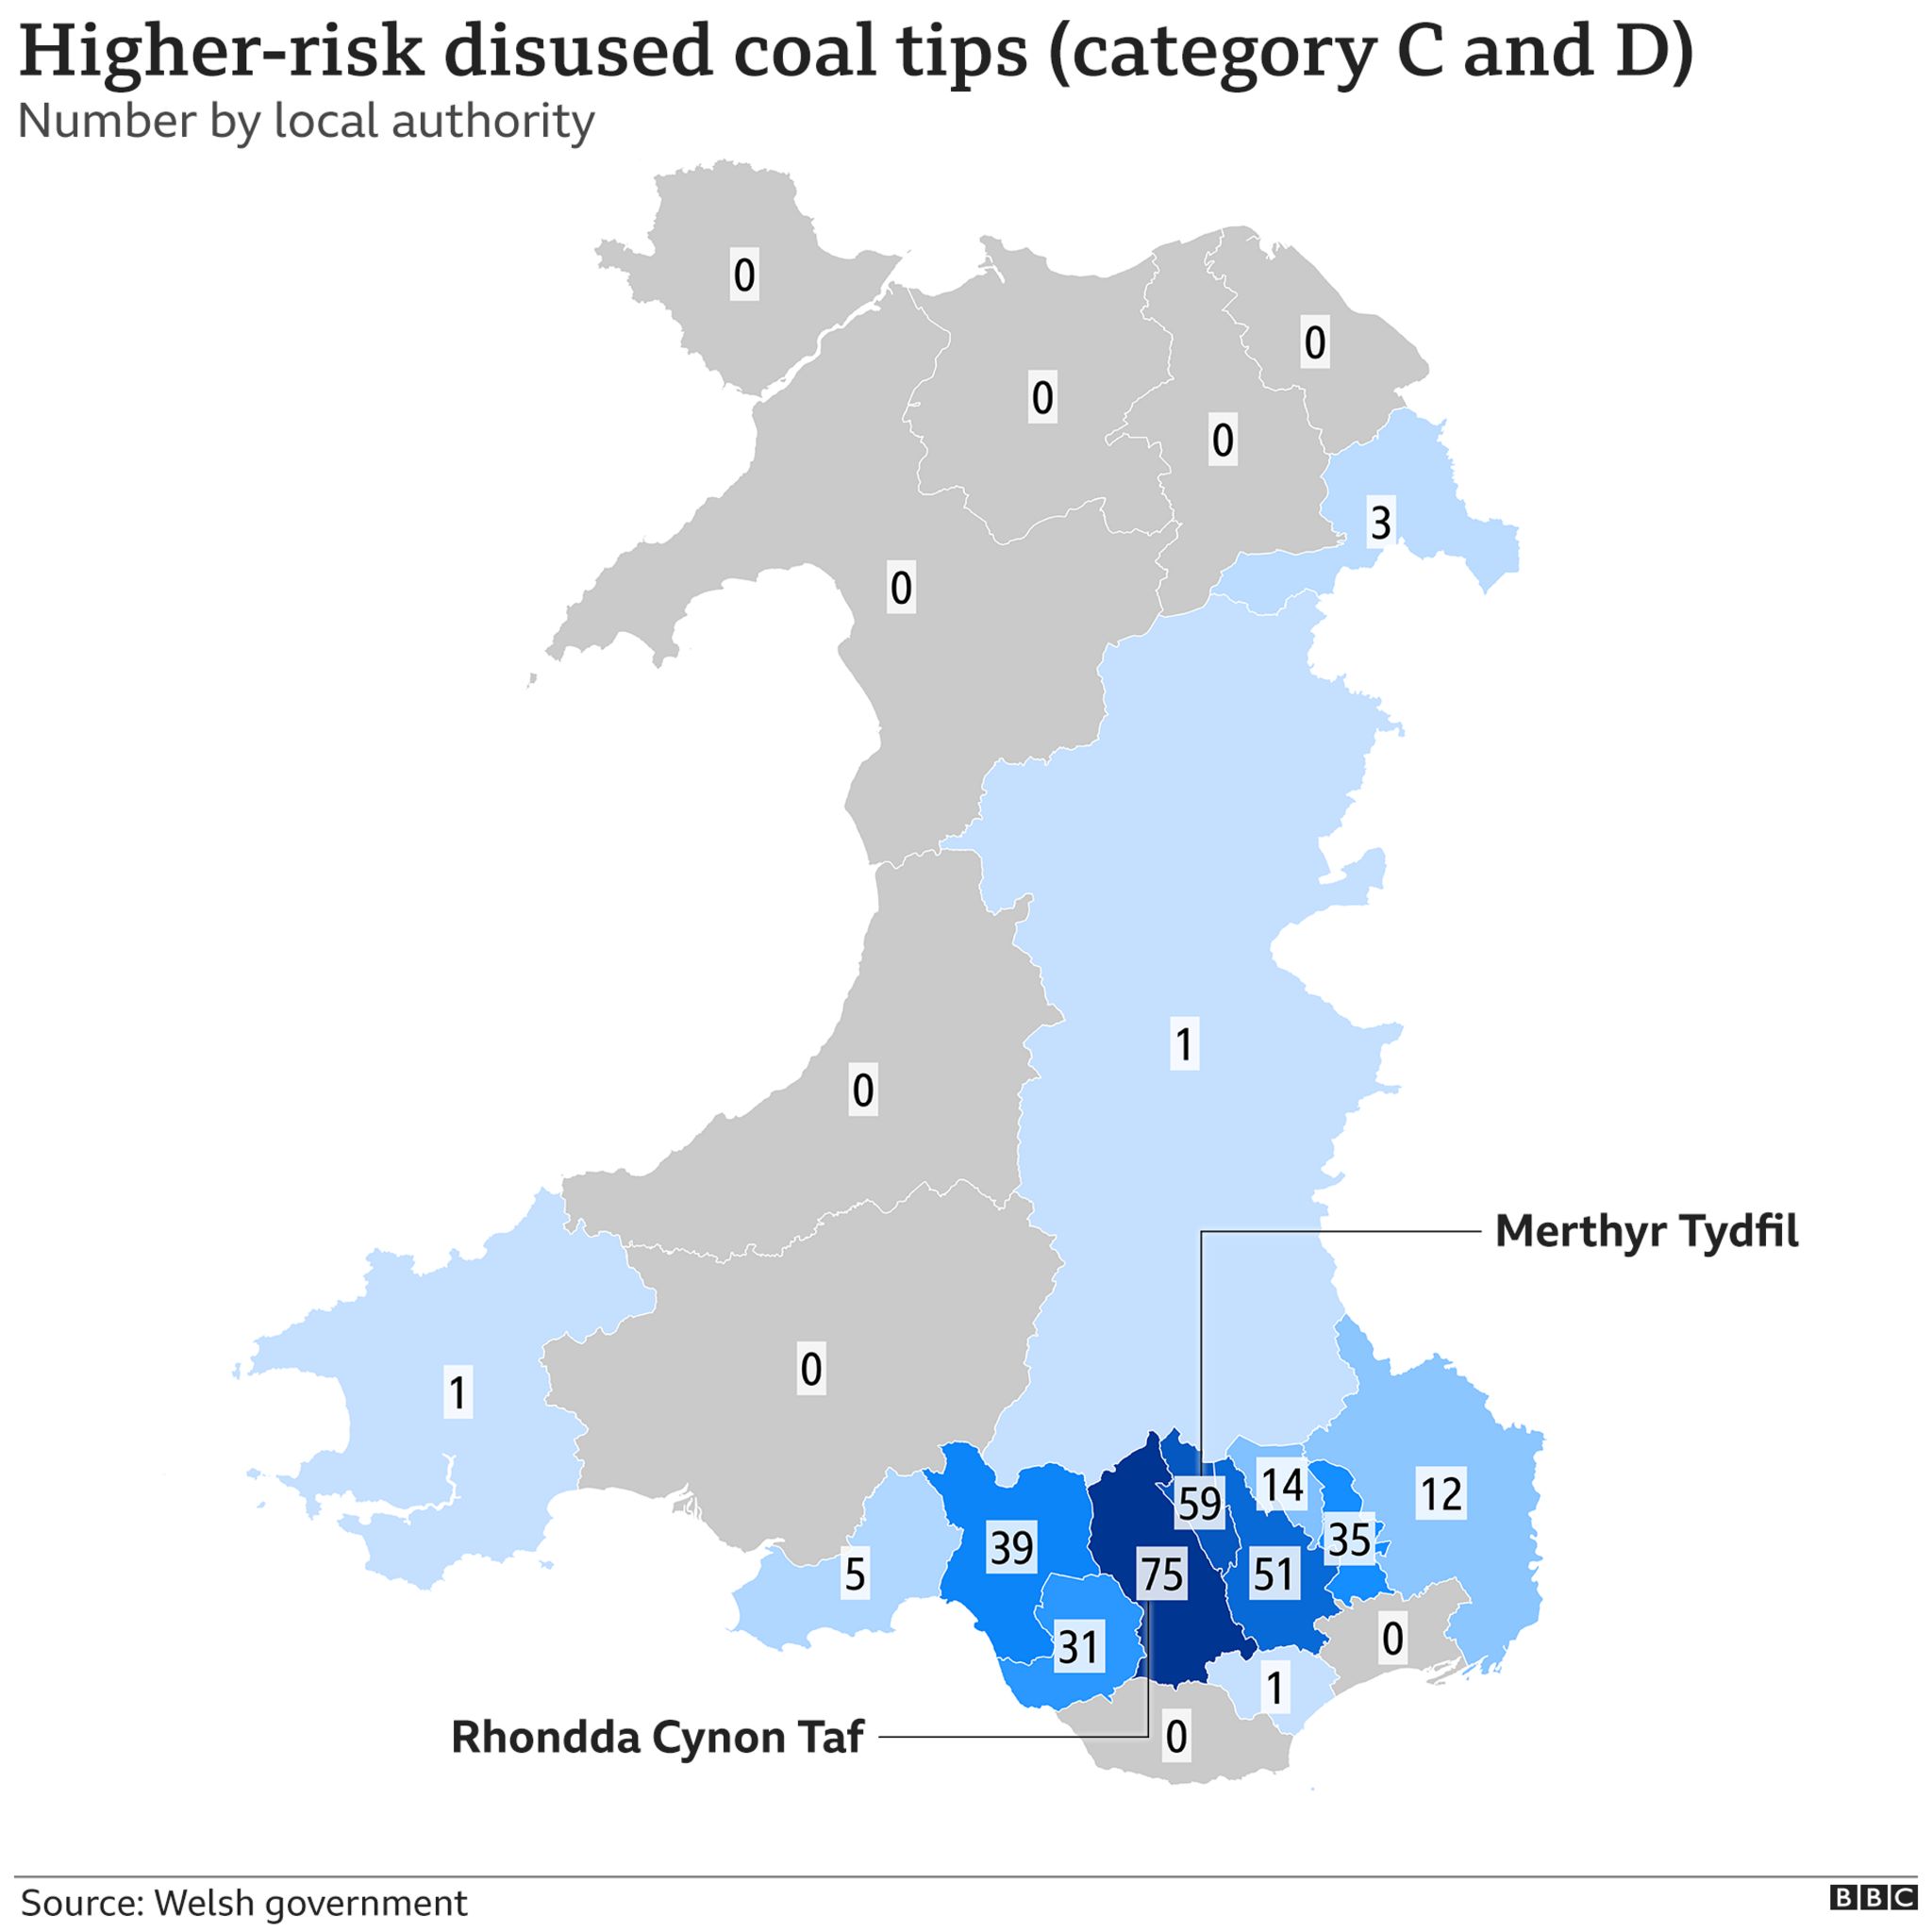 Map of higher risk coal tips in Wales